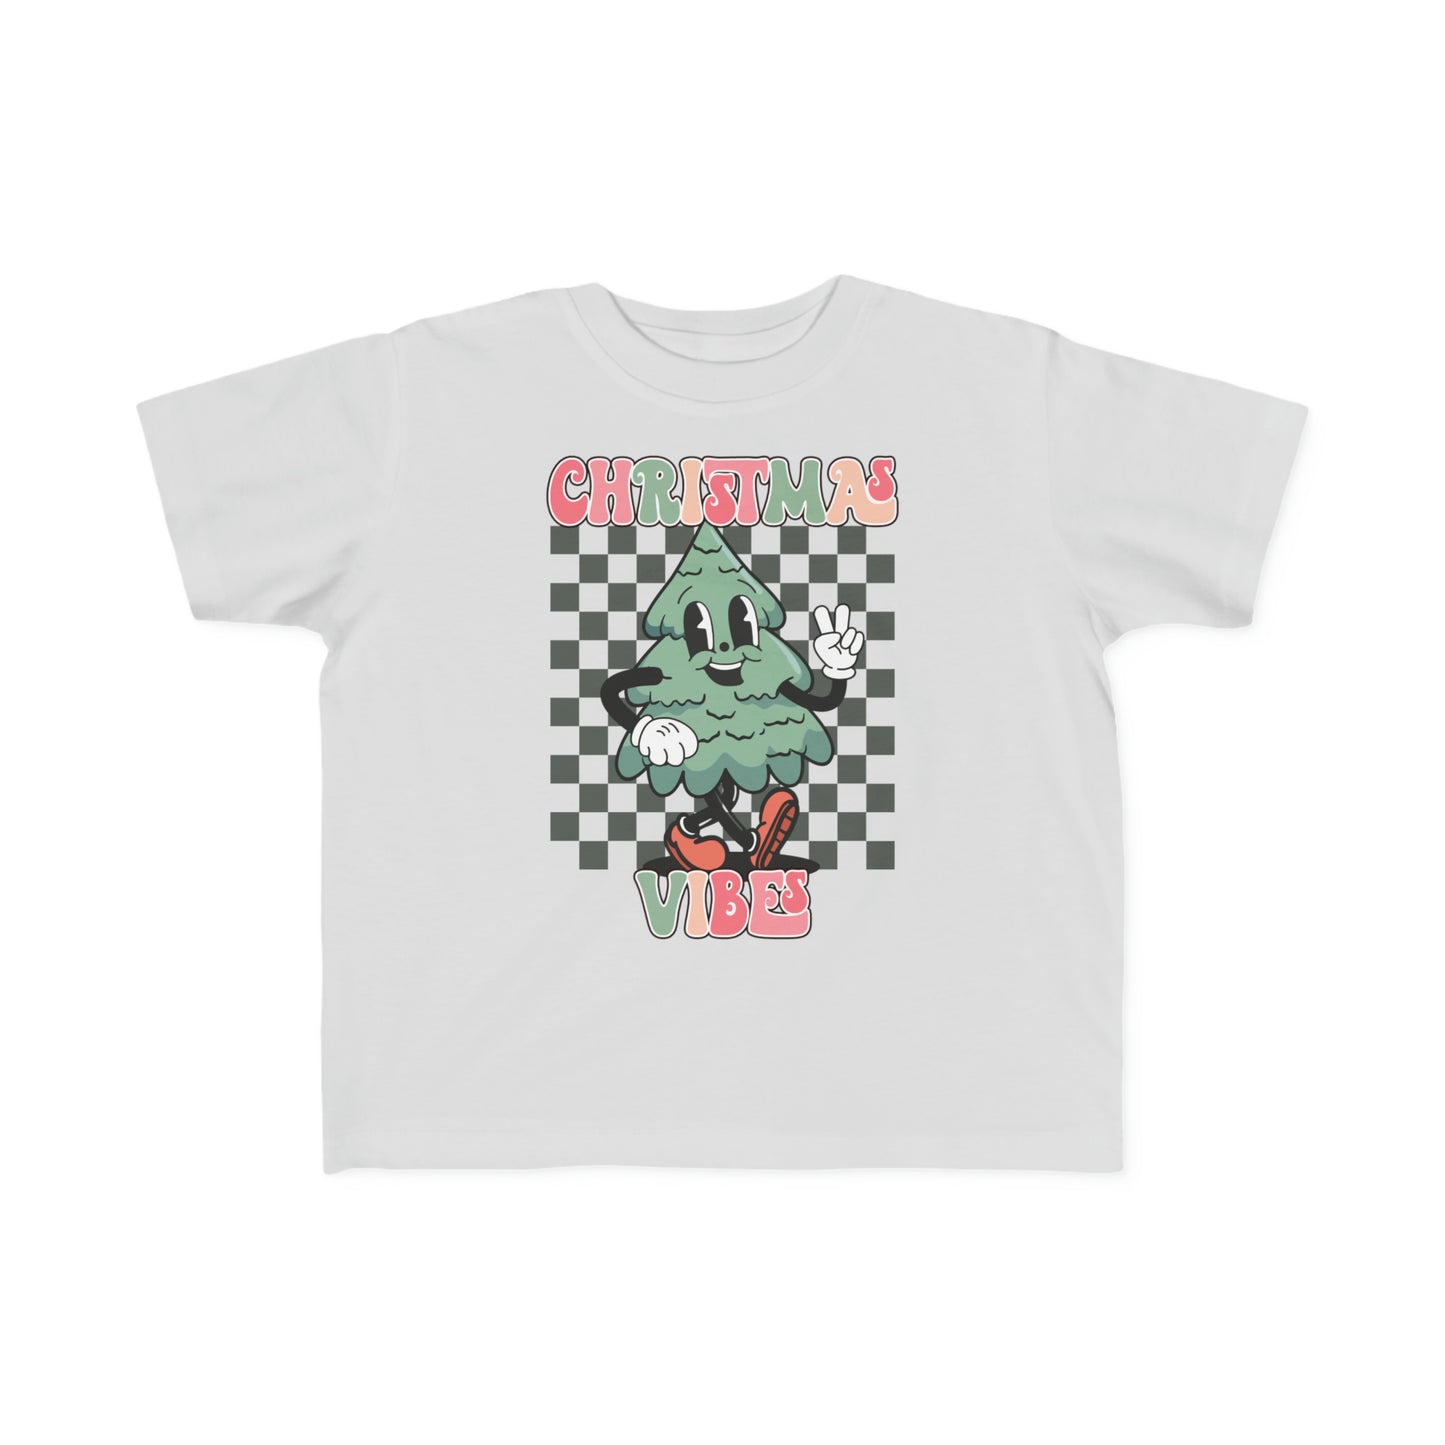 Christmas Vibes Toddler's Fine Jersey Tee